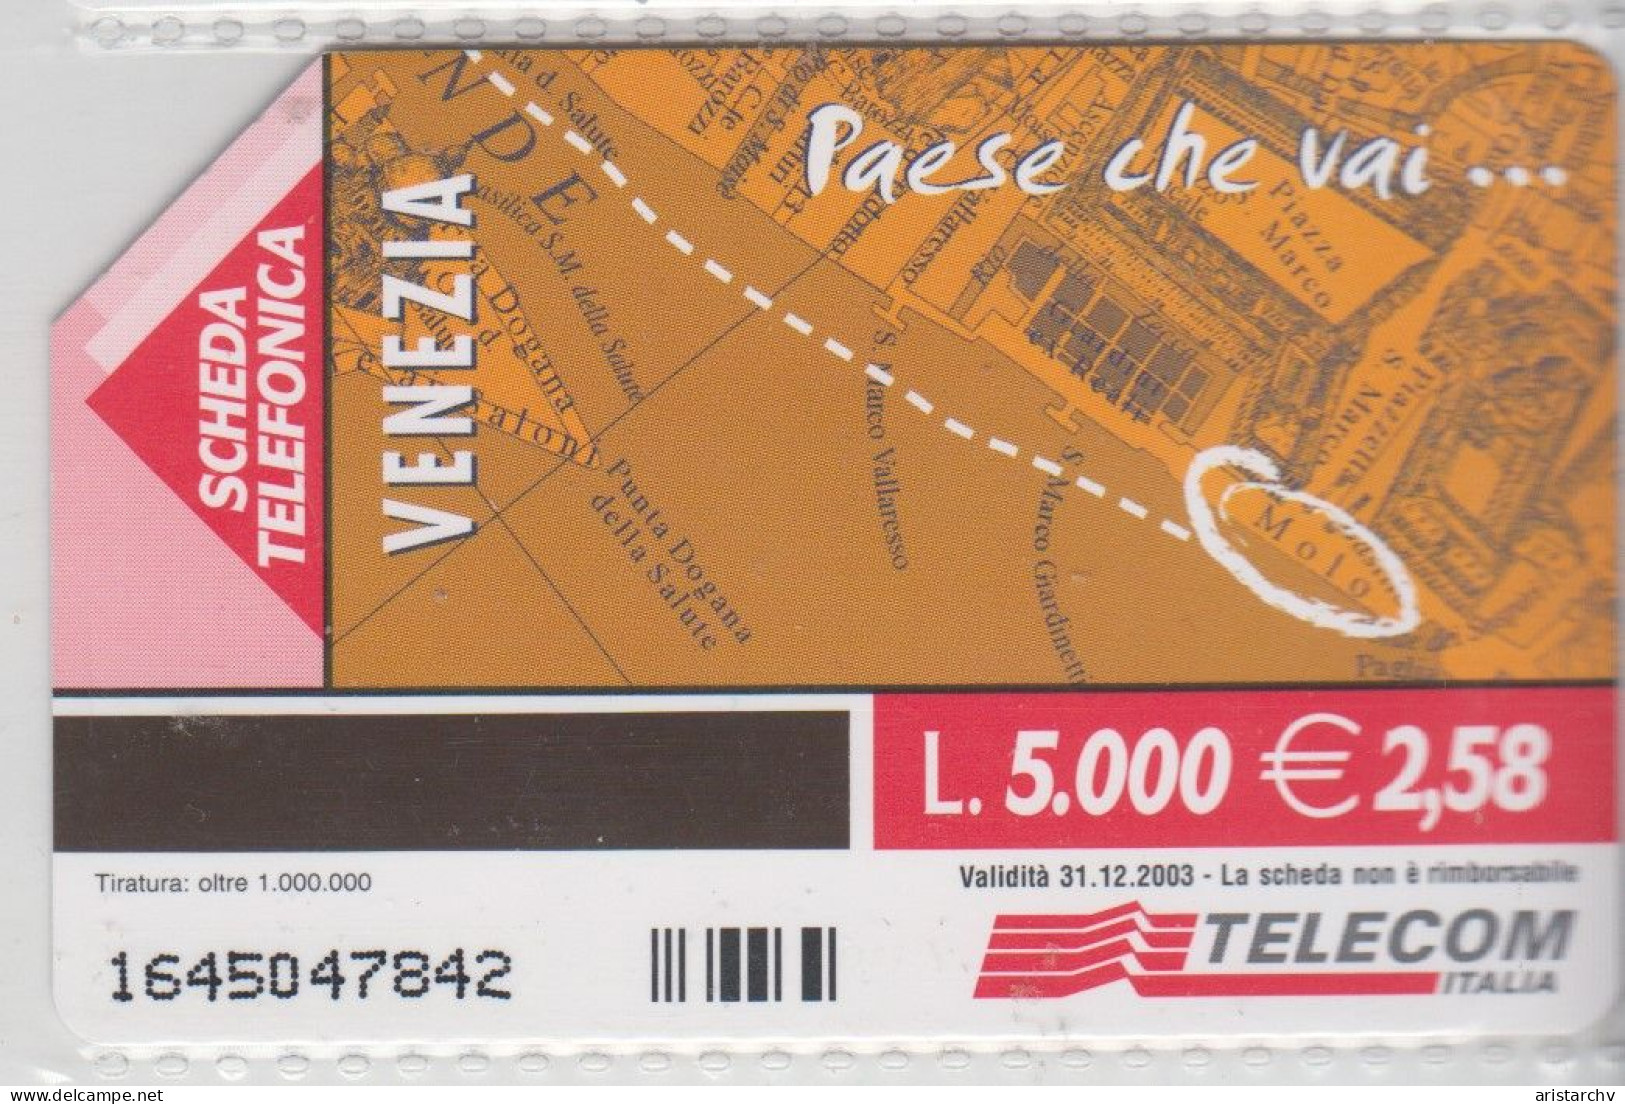 ITALY 2003 TRANSPORT YOU FIND TAXI BICYCLE VENEZIA SENT MARCO PALACE GONDOLA 3 CARDS - Public Ordinary